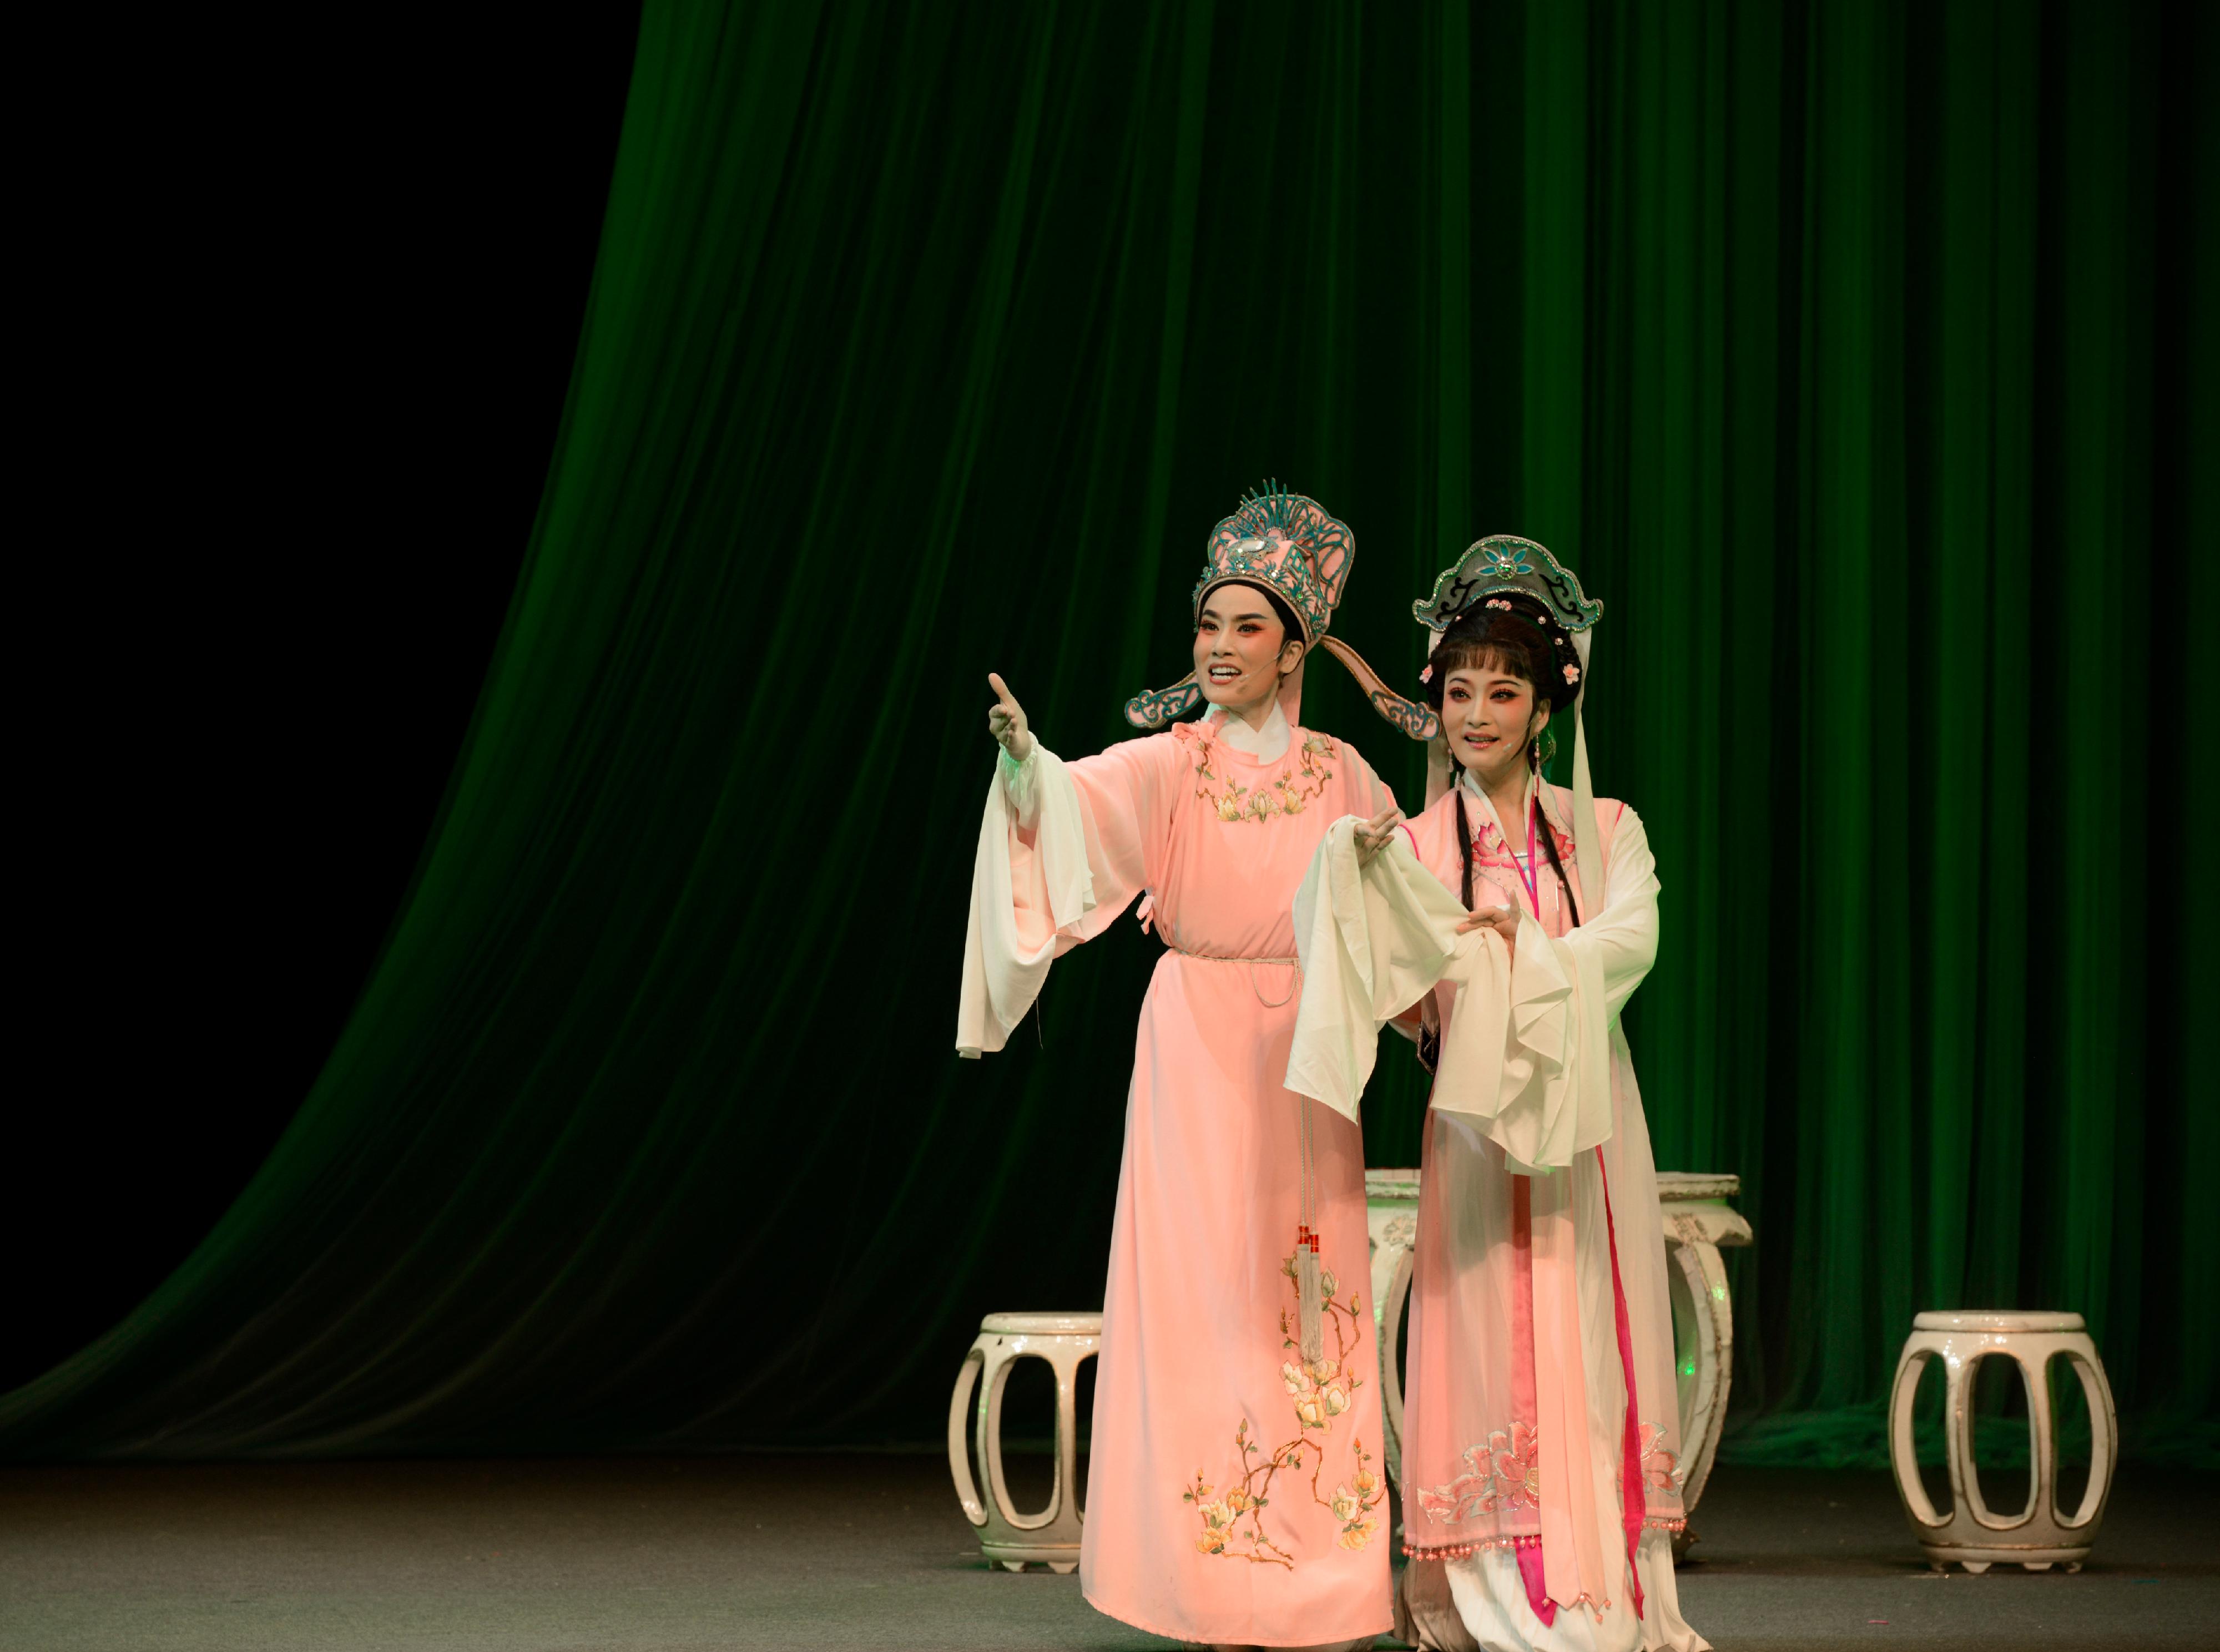 The Leisure and Cultural Services Department will present eight quality programmes at this year's Chinese Opera Festival from June to August. Photo shows a scene from the Yue opera performance of "The Jade Dragonfly". 